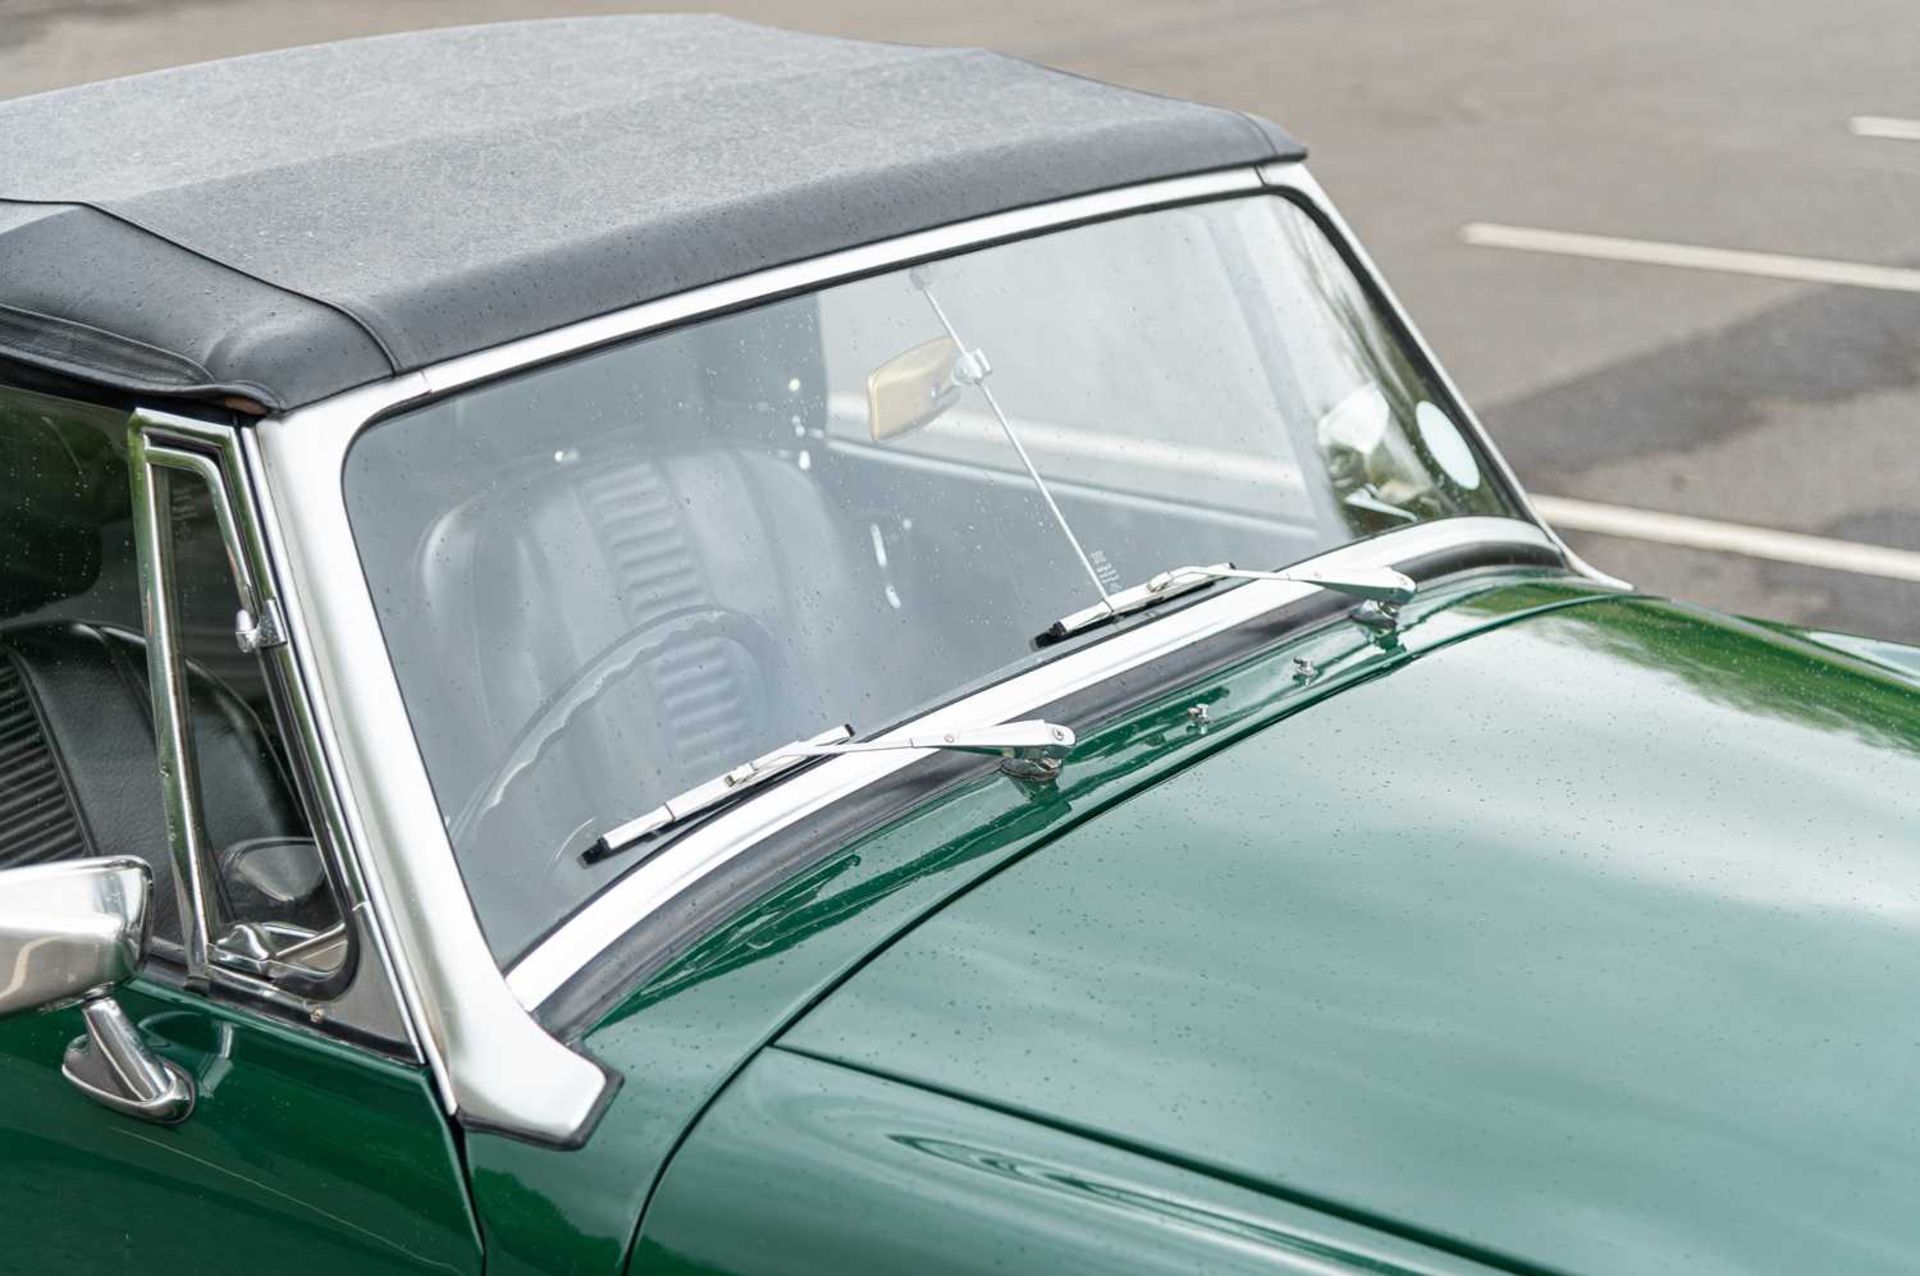 1965 Austin-Healey Sprite Formerly the property of British Formula One racing driver David Piper - Image 26 of 71